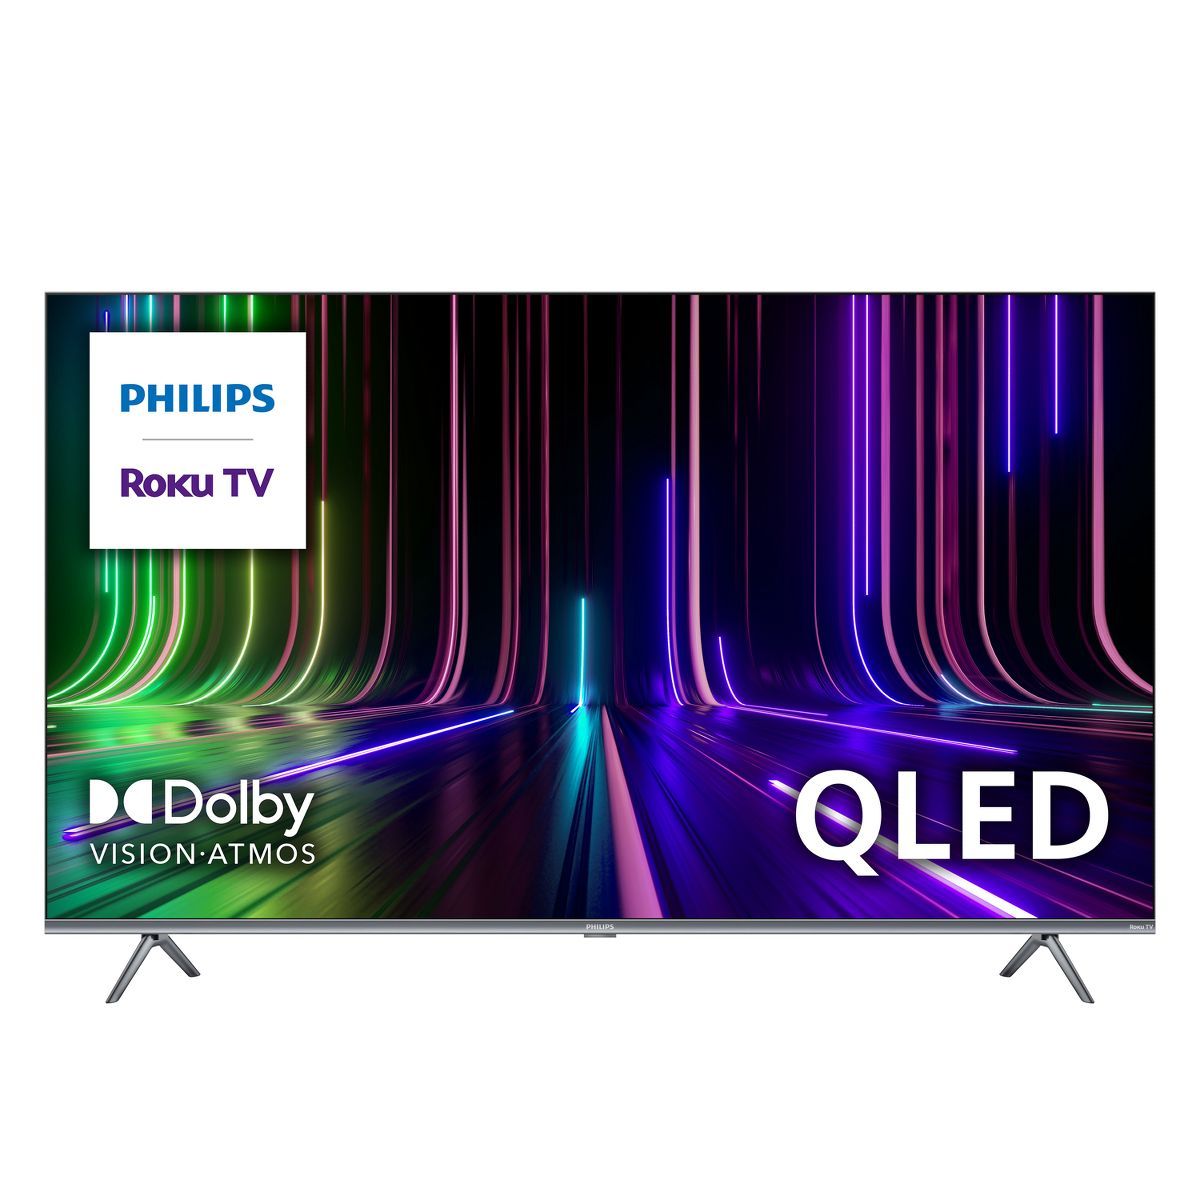 Philips 55" 4K QLED Roku Smart TV - 55PUL7973/F7 - Special Purchase | Target